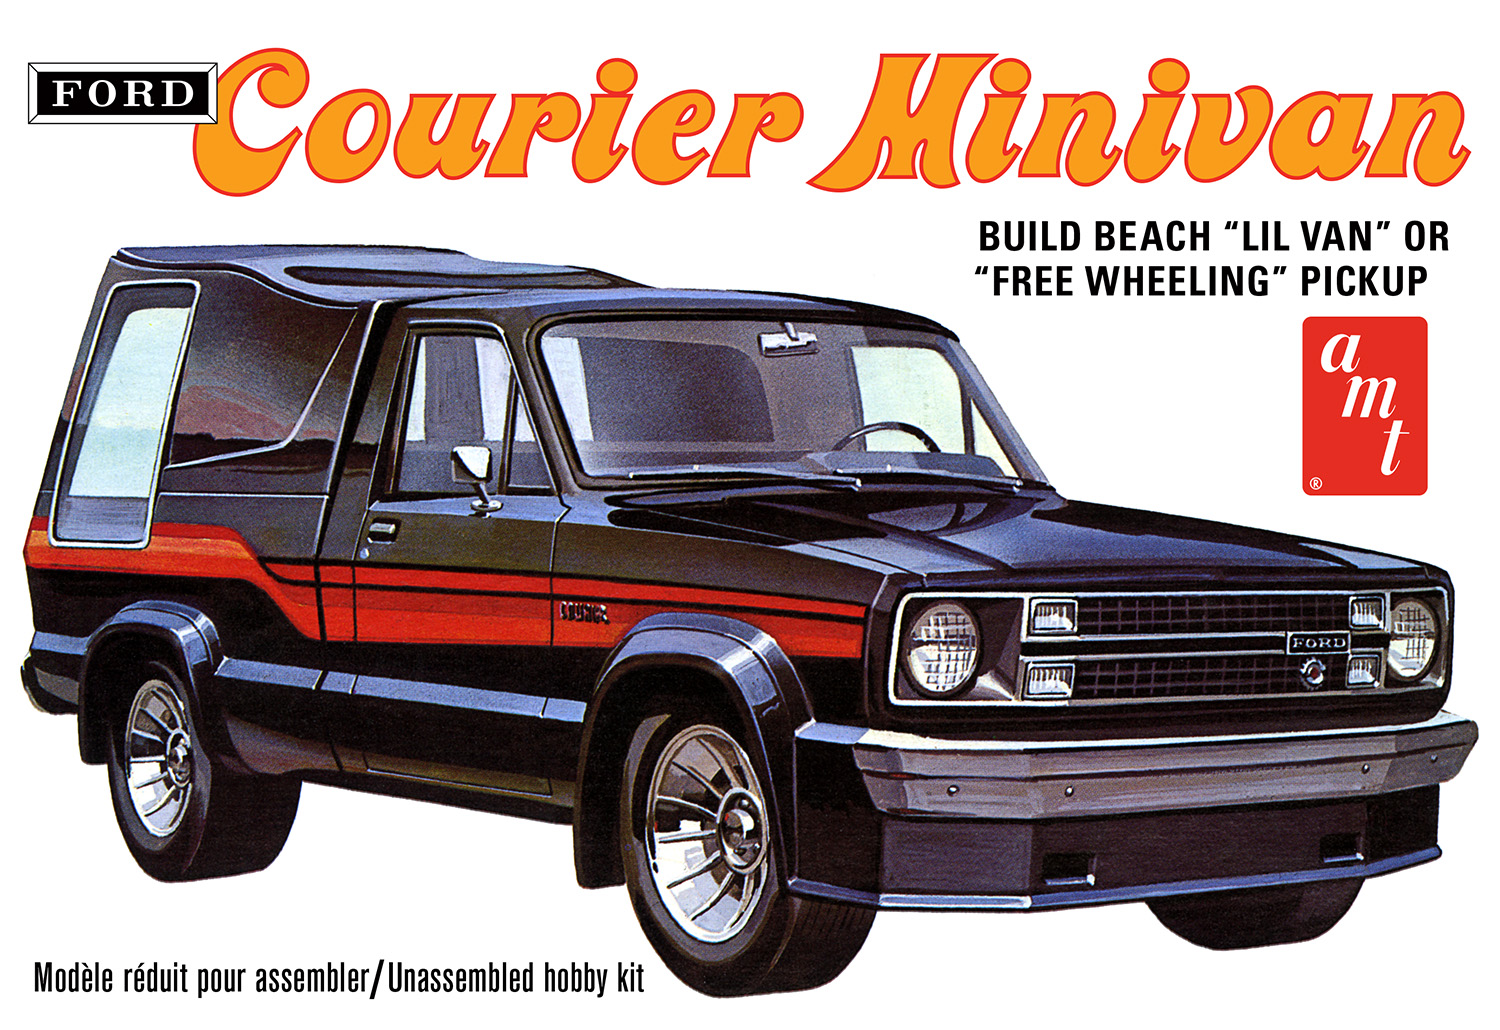 1978 Ford Courier Minivan